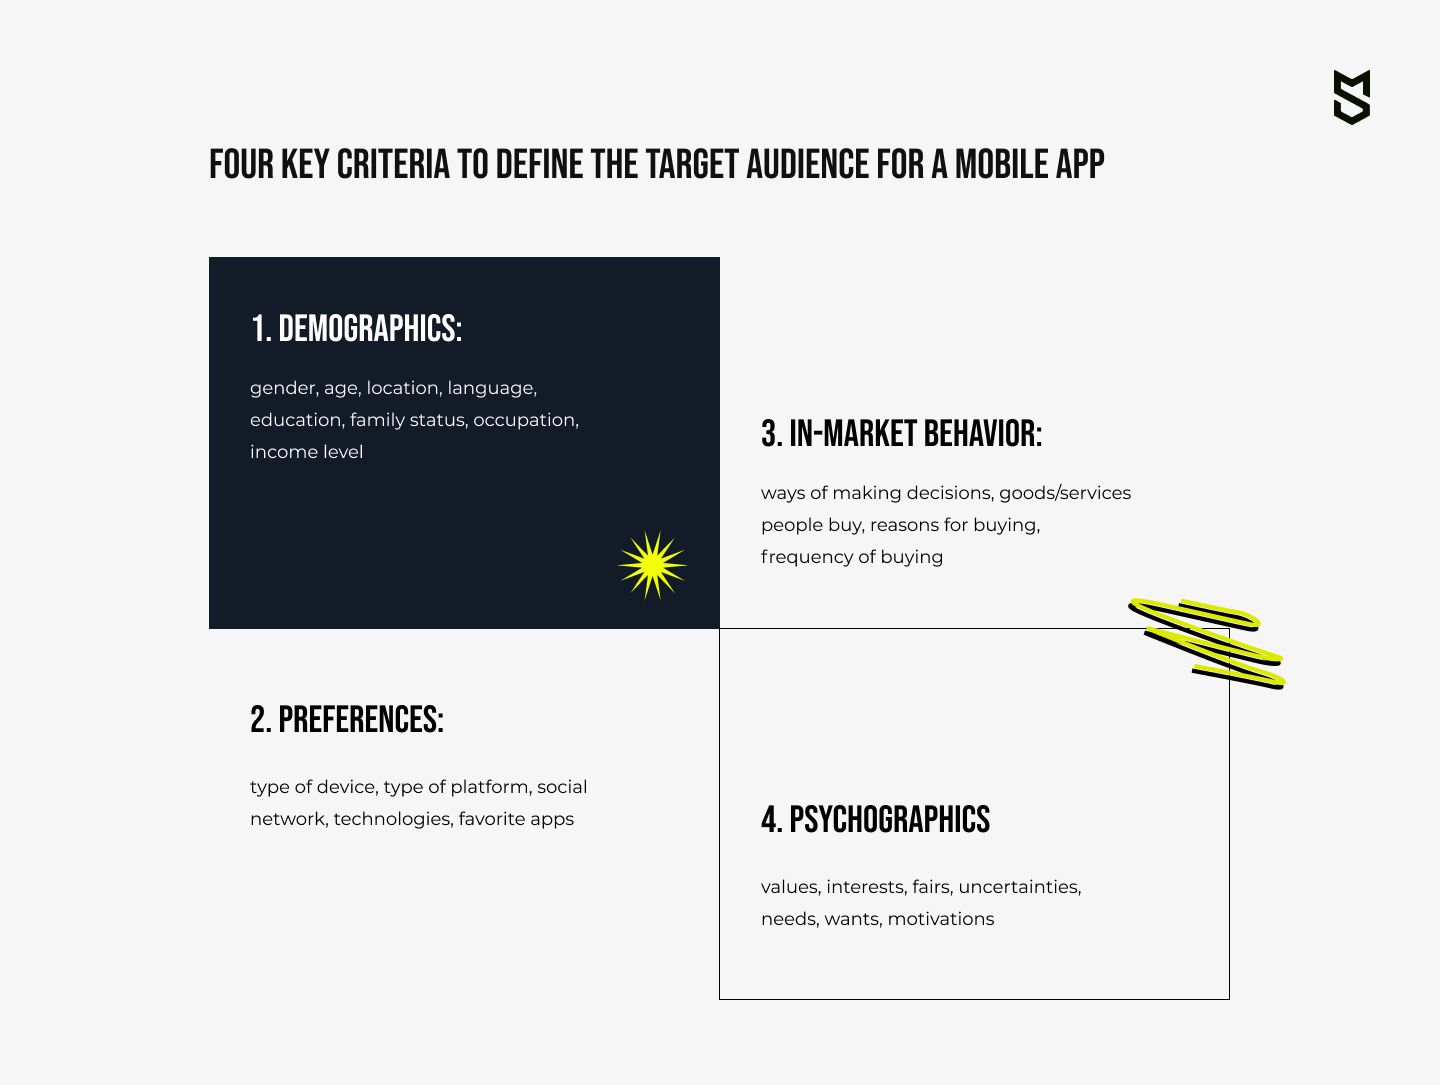 Four key criteria to define the target audience for a mobile app